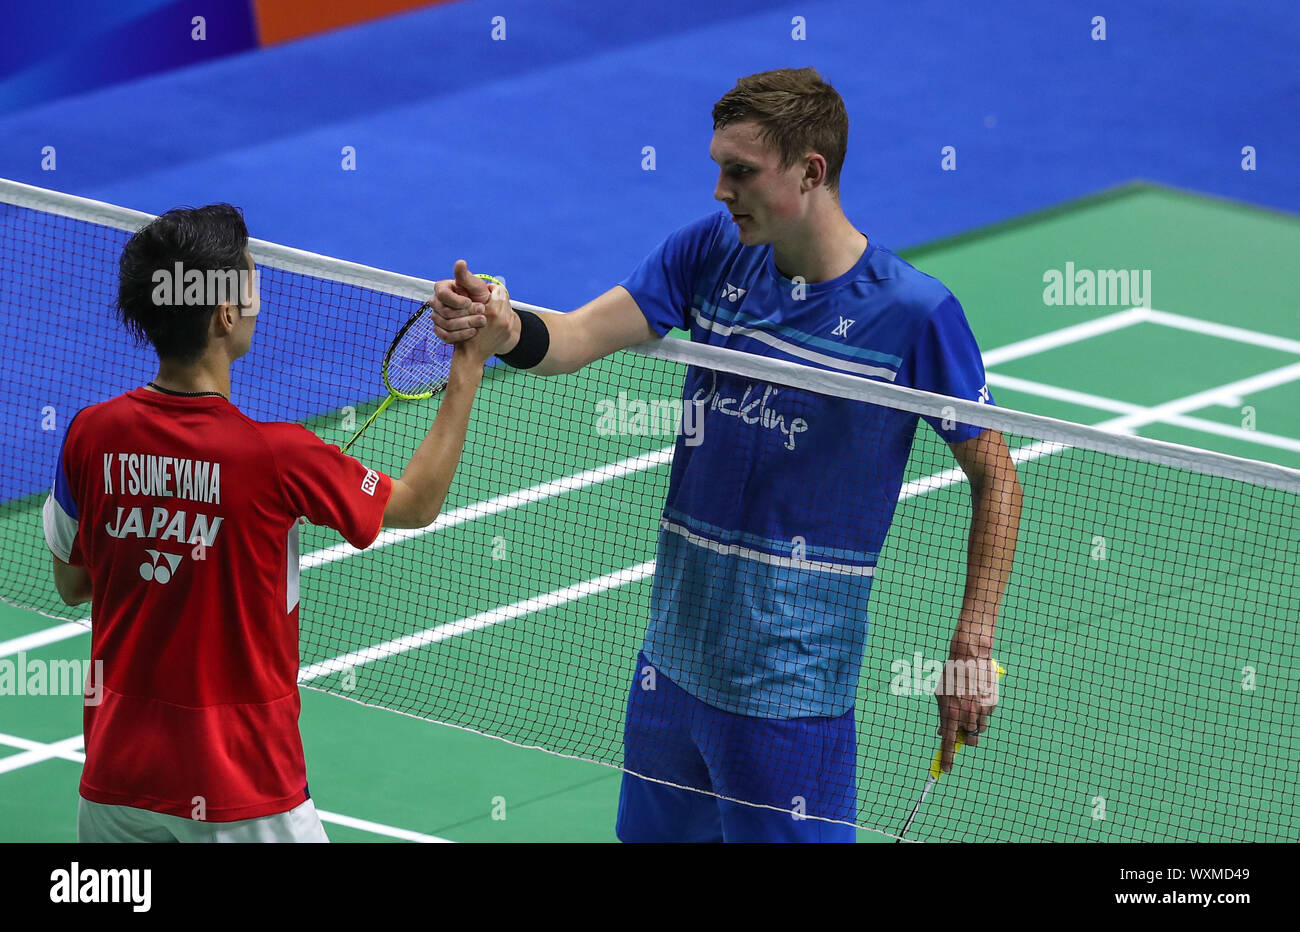 Changzhou, China's Jiangsu Province. 17th Sep, 2019. Viktor Axelsen (R) of  Denmark shakes hands with Kanta Tsuneyama of Japan during the men's singles  first round match at China Open 2019 badminton tournament